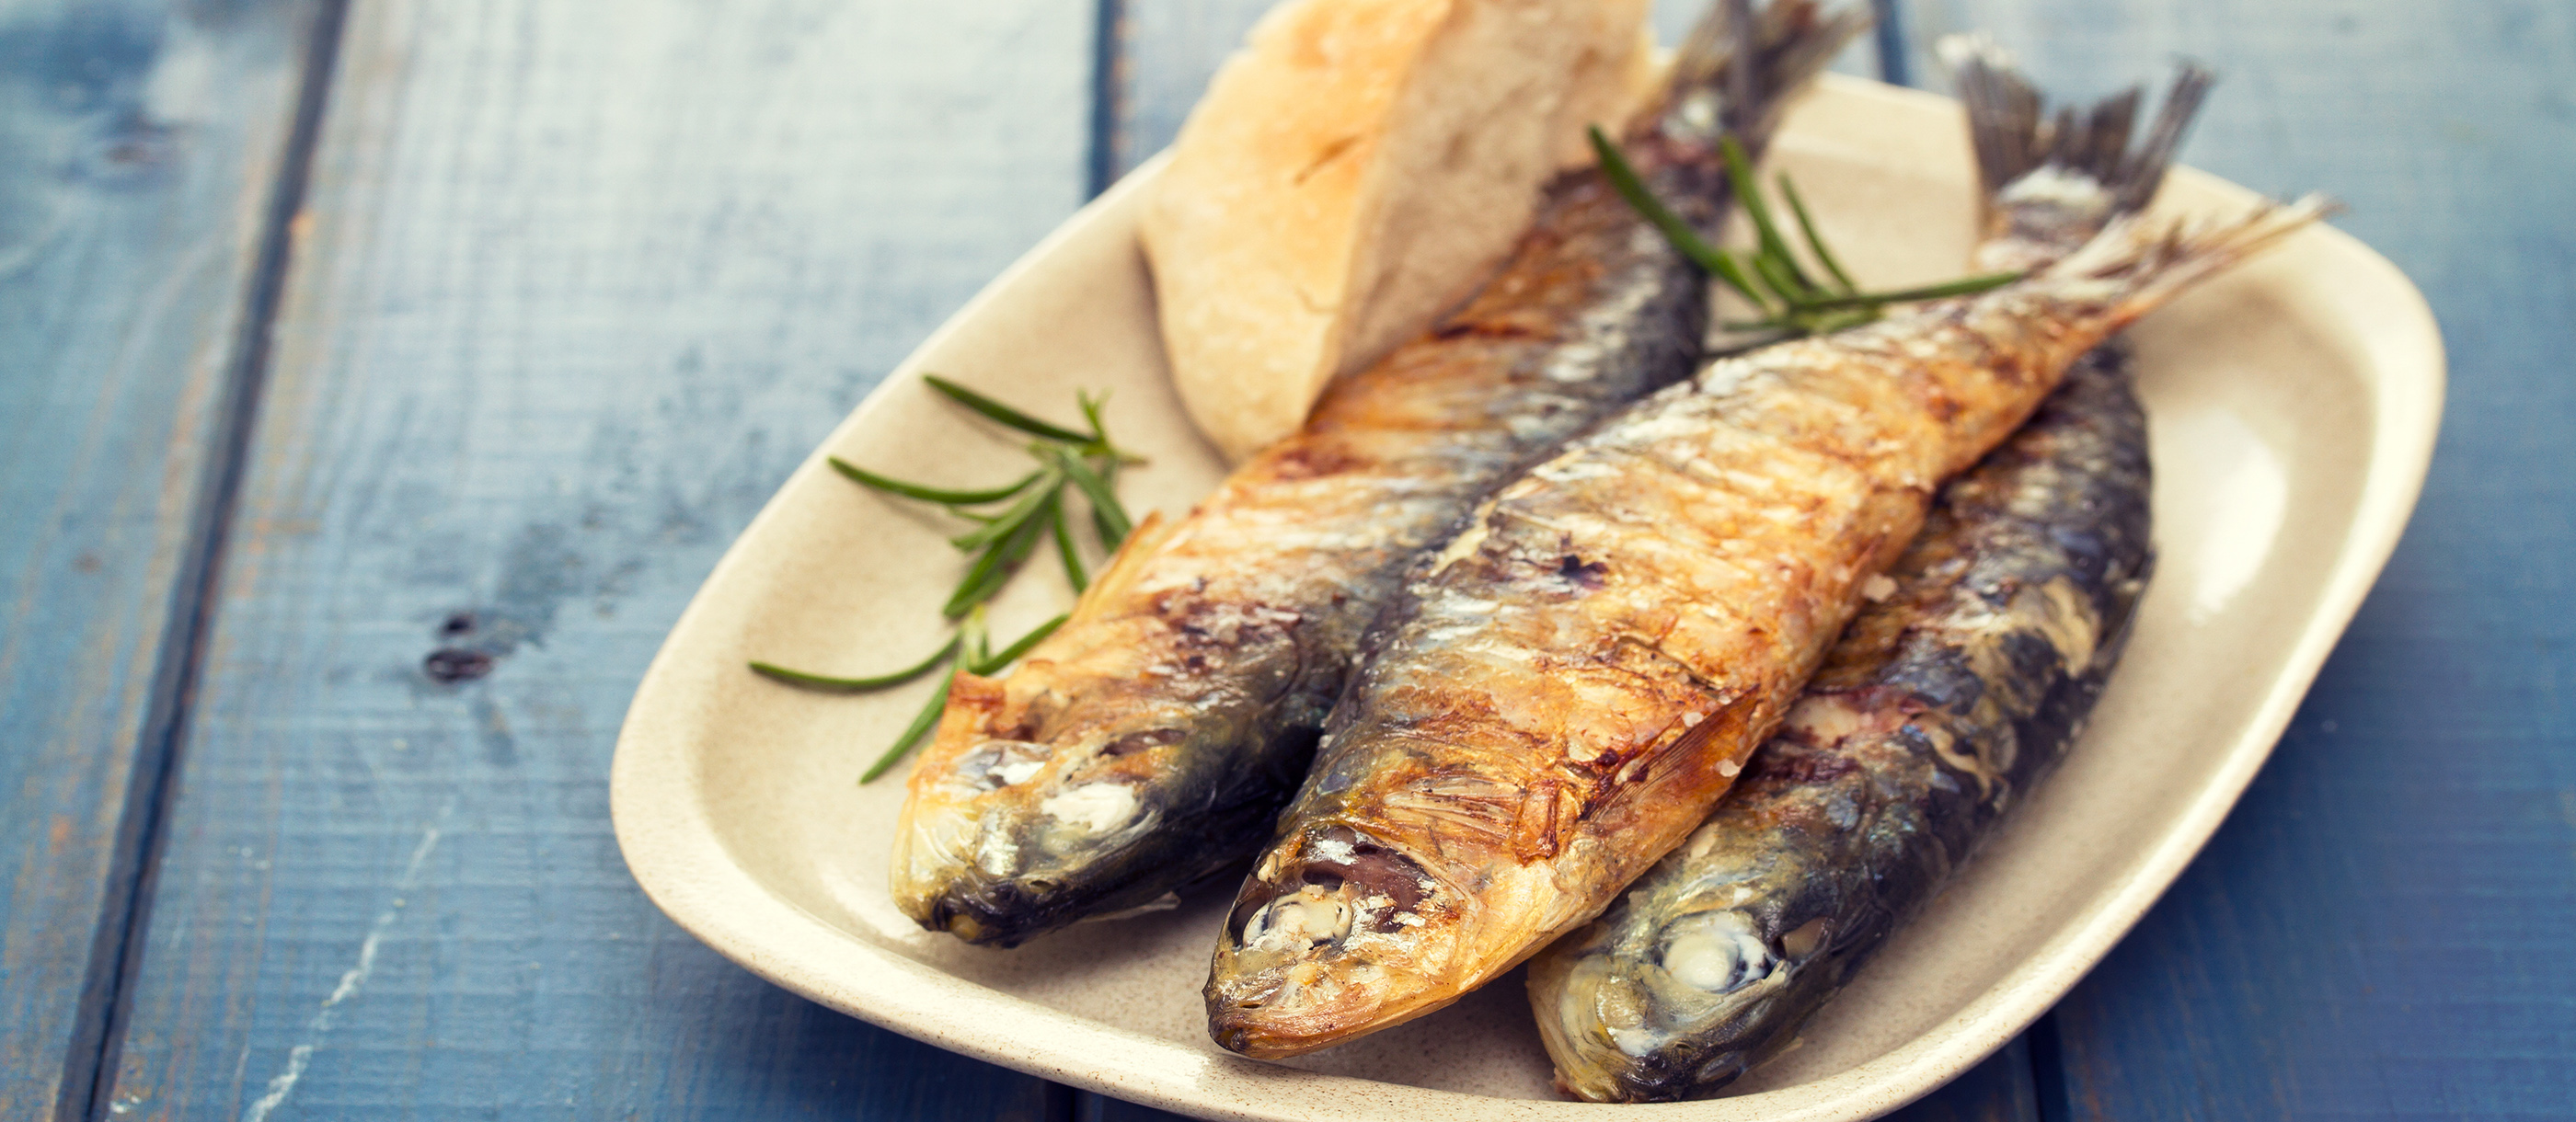 The simple beauty of Portuguese-style grilled sardines